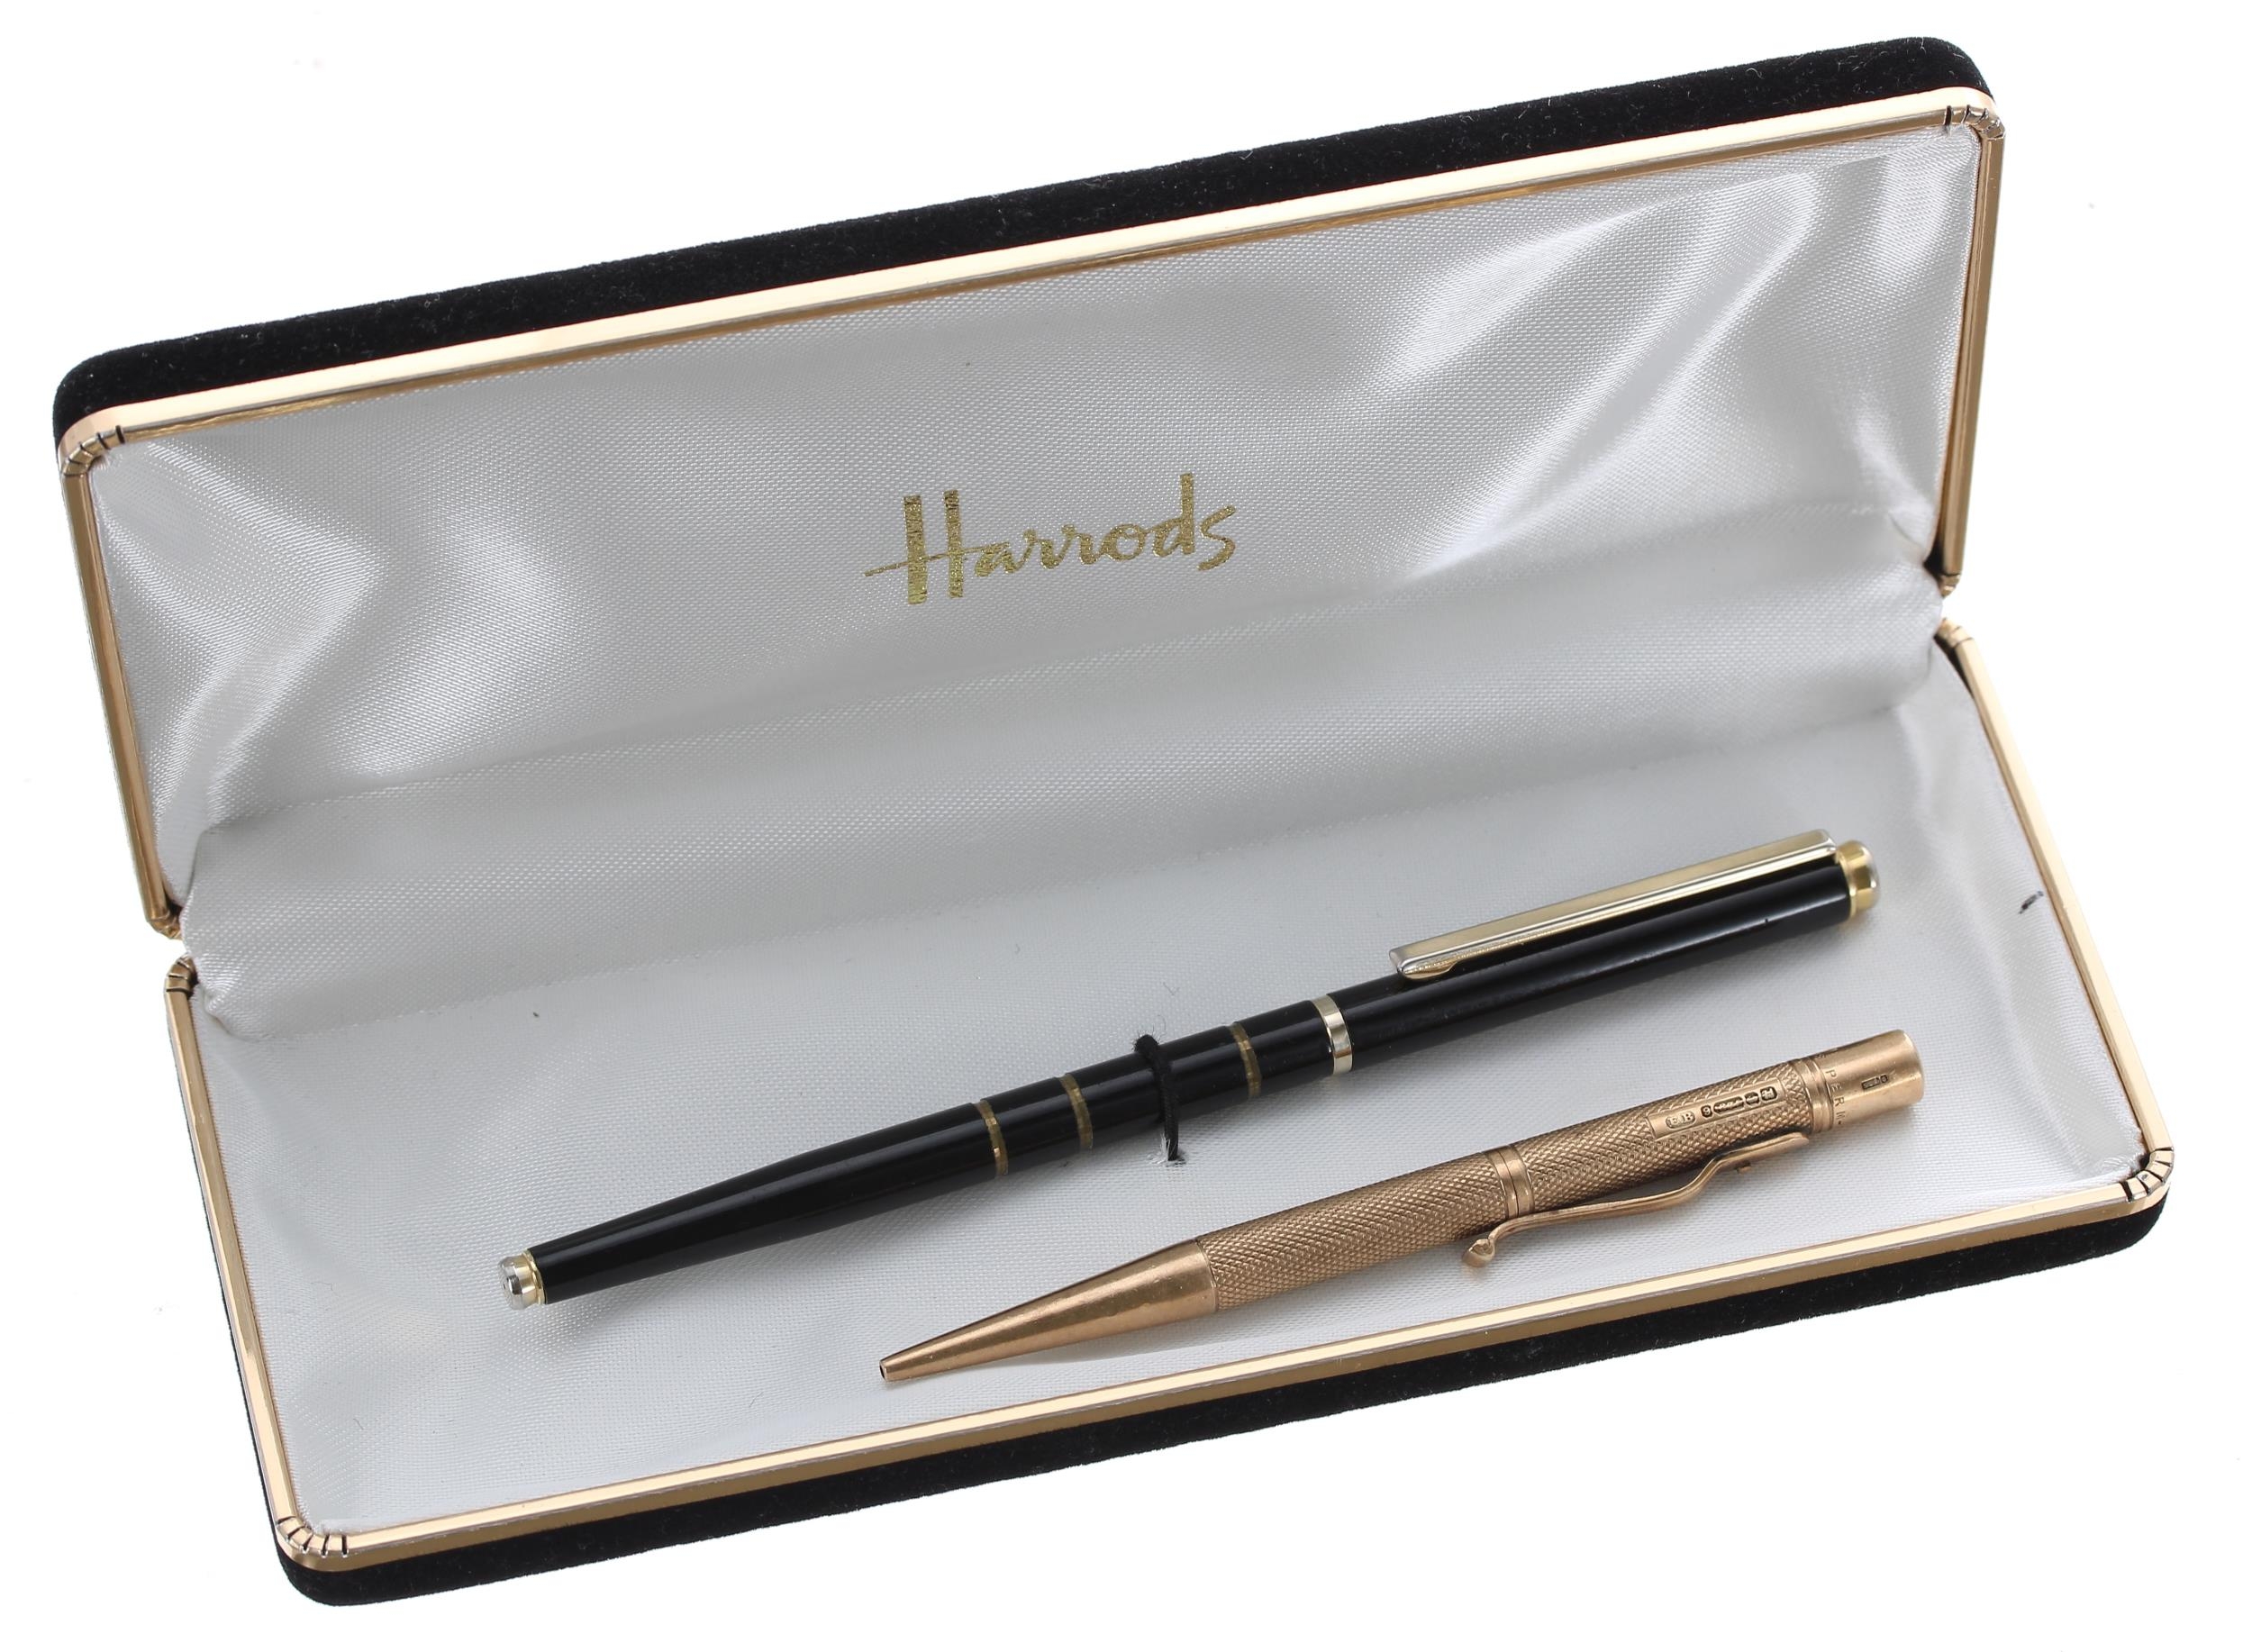 Baker's Perm-Point 9ct engine turned pencil, Birmingham 1957, 18.8gm; with a boxed Harrods pen (2)